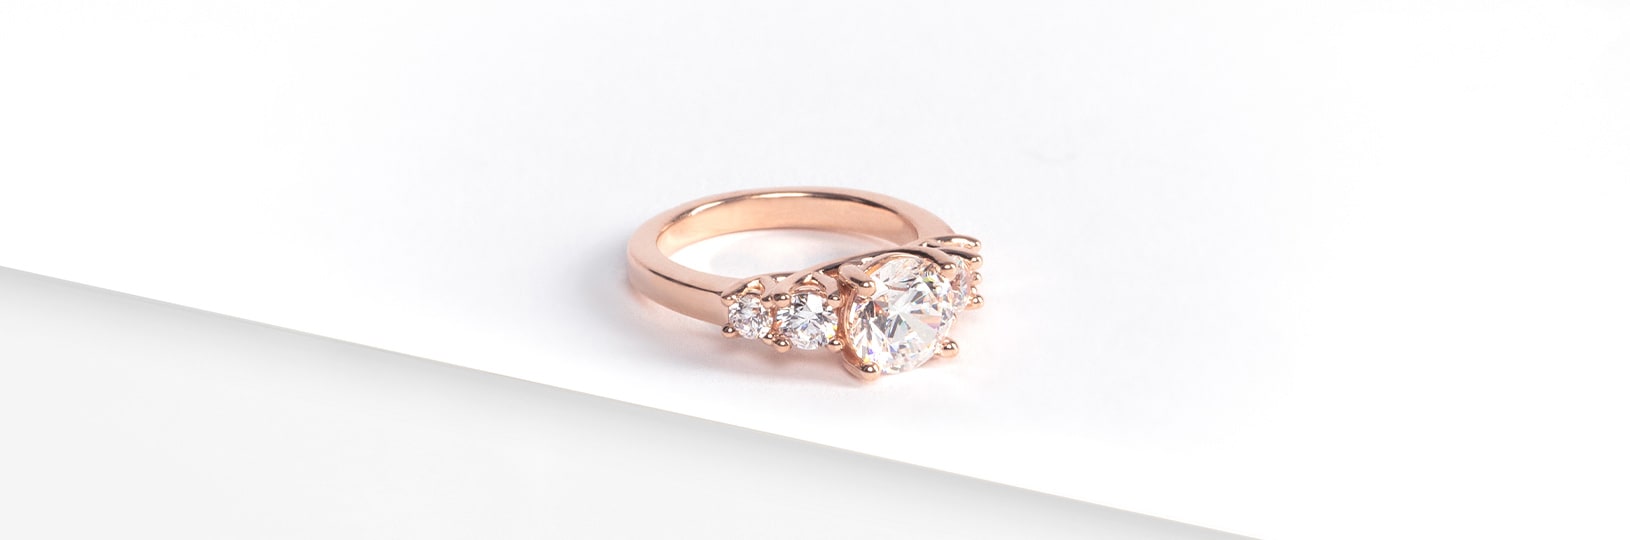 A rose gold engagement ring setting